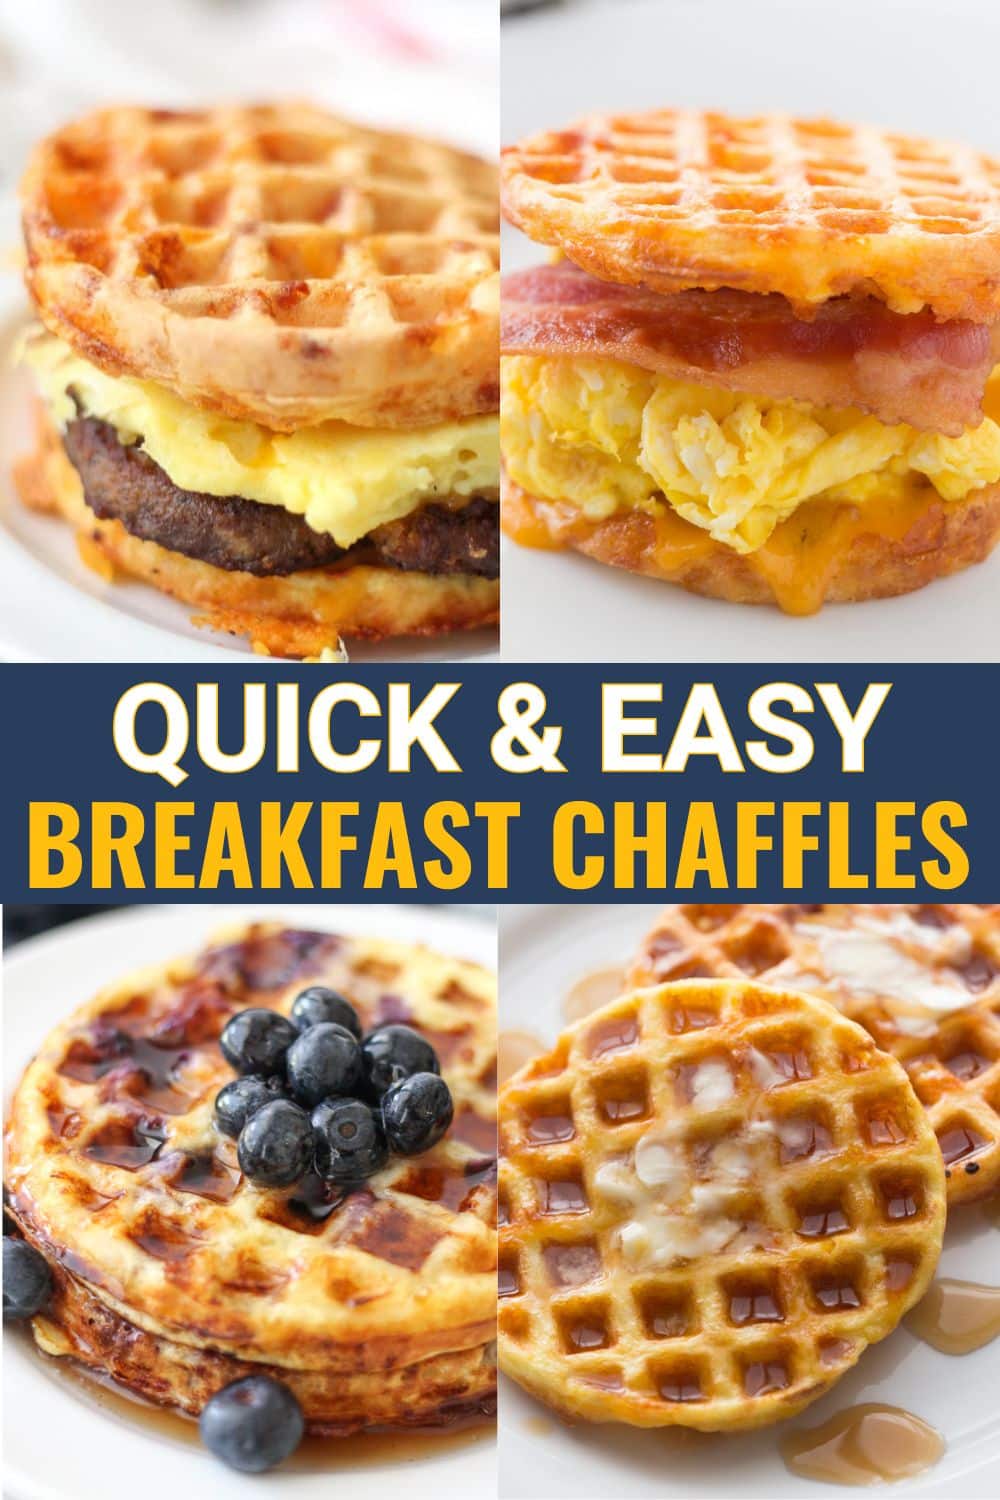 sweet and savory breakfast chaffles: Golden brown sausage egg cheese croissant chaffle breakfast sandwich top left and bacon egg and cheese breakfast chaffle sandwich top right banner in the middle that says quick and easy breakfast chaffles and stacked fluffy blueberry chaffles with syrup in top row. Bottom row shows cinnamon pumpkin chaffle behind buttery chaffle waffle sprinkled with syrup.